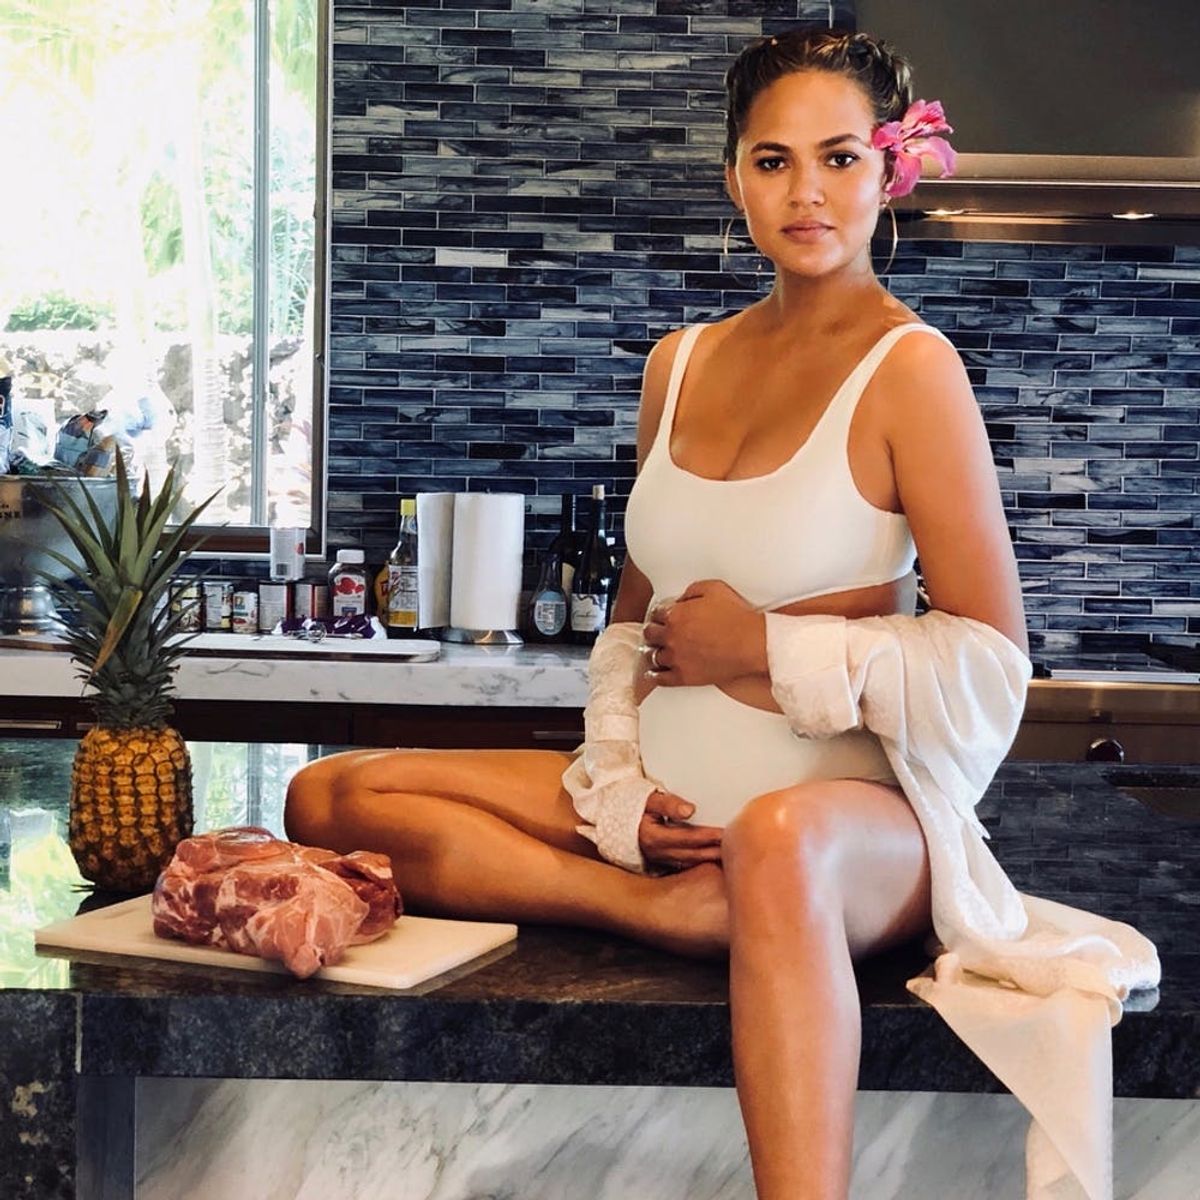 10 Cooking Lessons You Should Learn from Chrissy Teigen